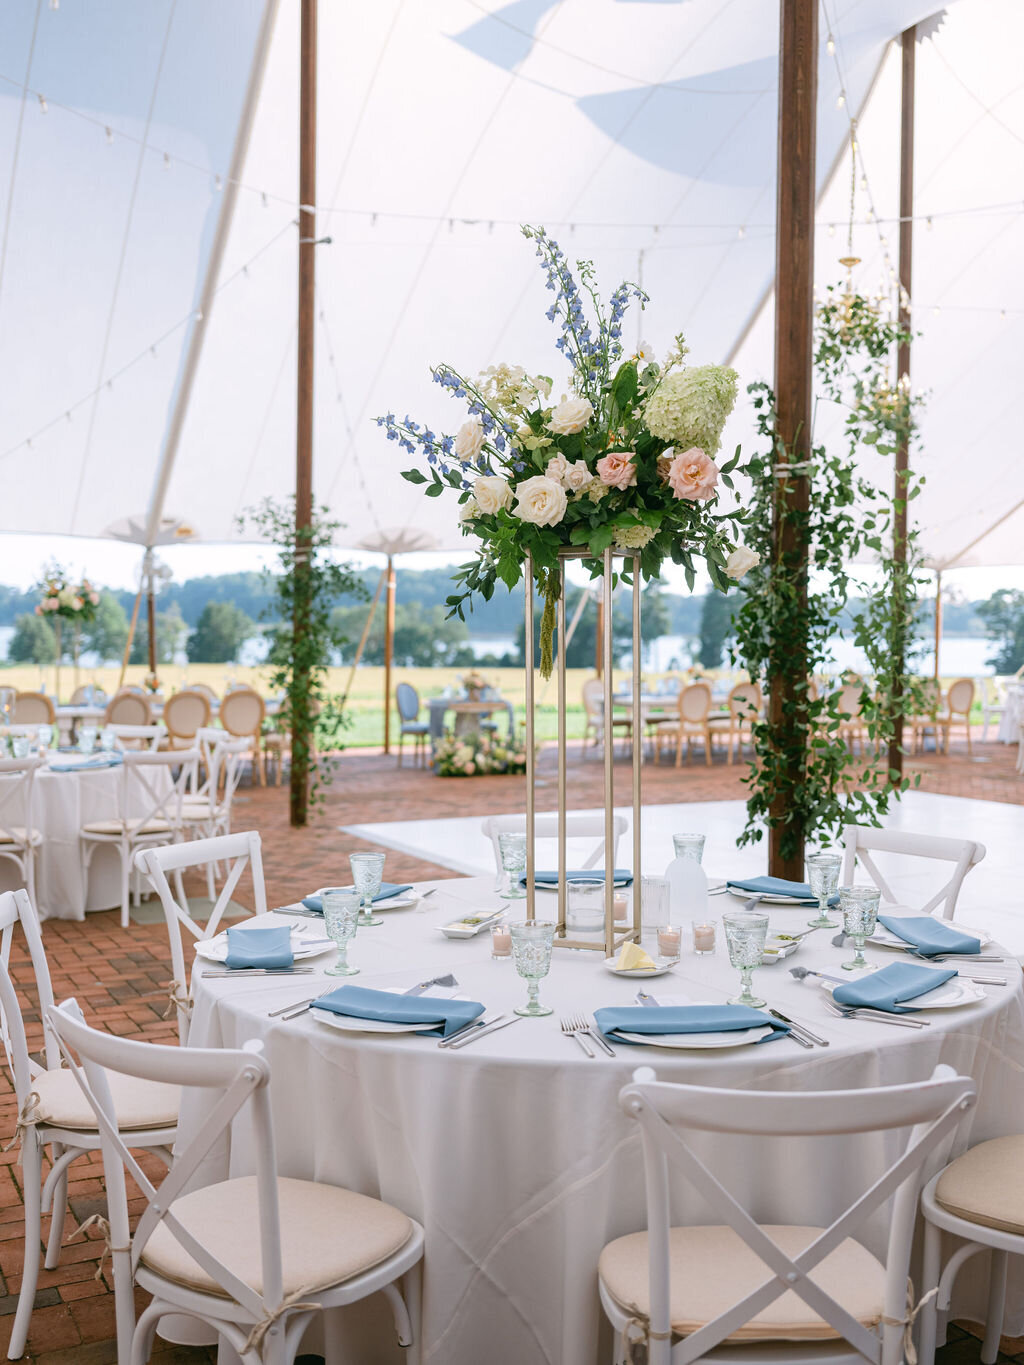 Tented reception at Brittland Estate with smilax greenery on tent polls and arrangement on a gold stand at a round guest table with florals including green hydrangea, blue delphinium, toffee roses, blush garden roses, and green hanging amaranthus.